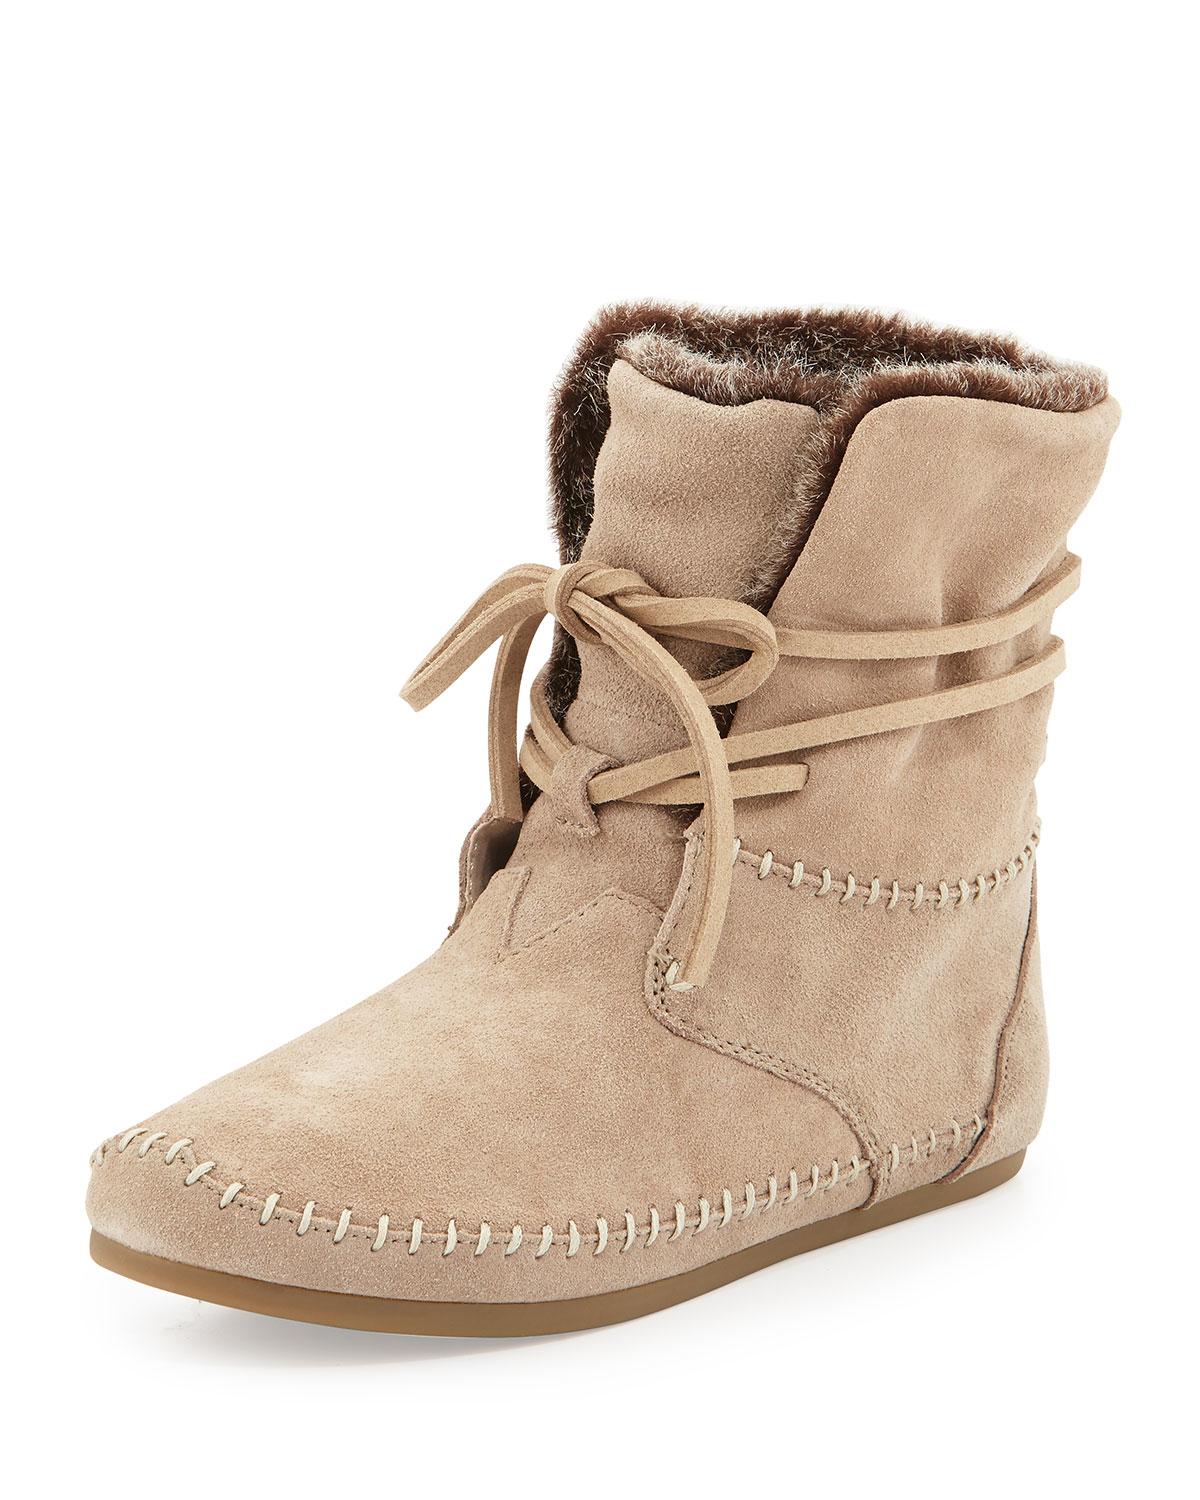 TOMS Zahara Suede Boots in Natural - Lyst